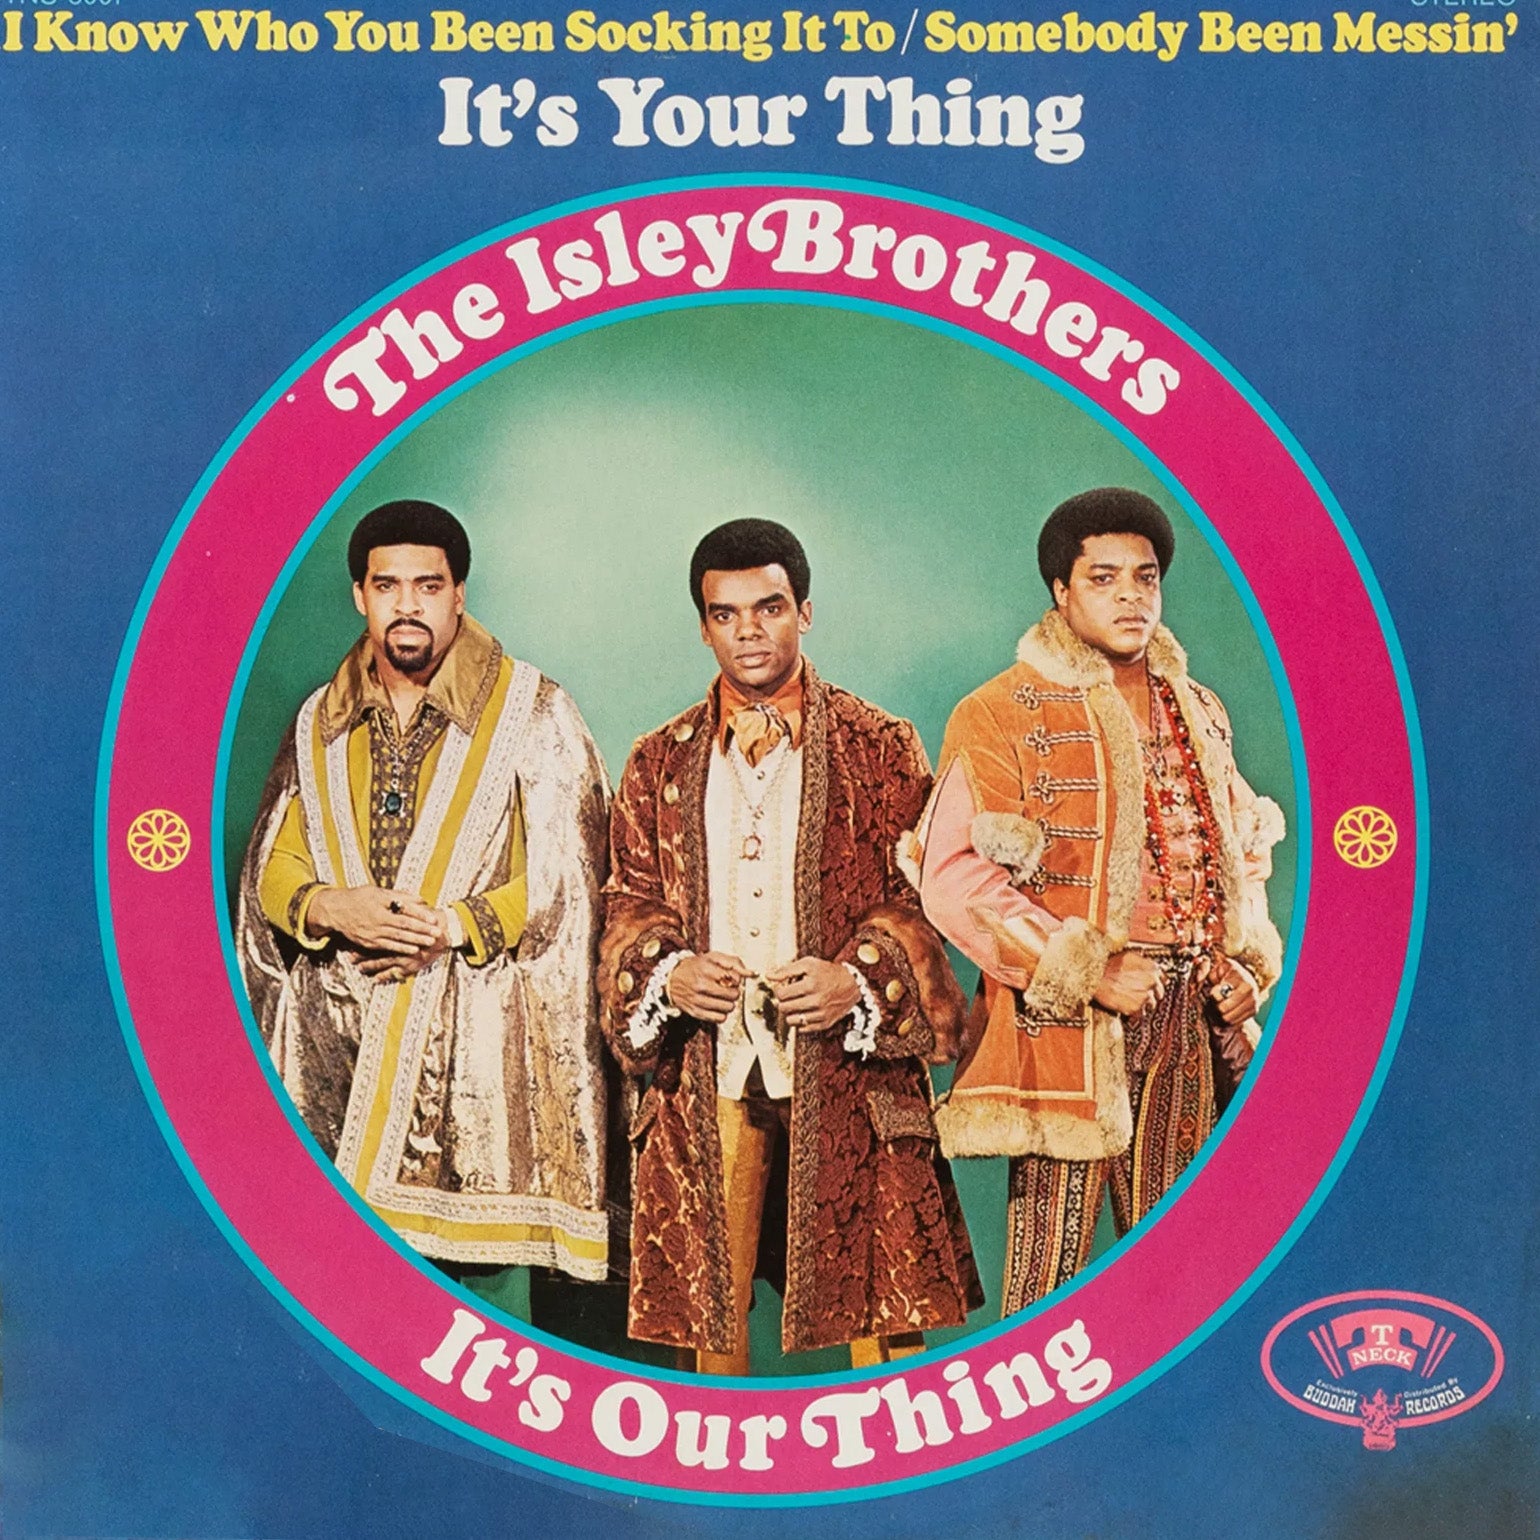 ISLEY BROTHERS, THE – It's Our Thing